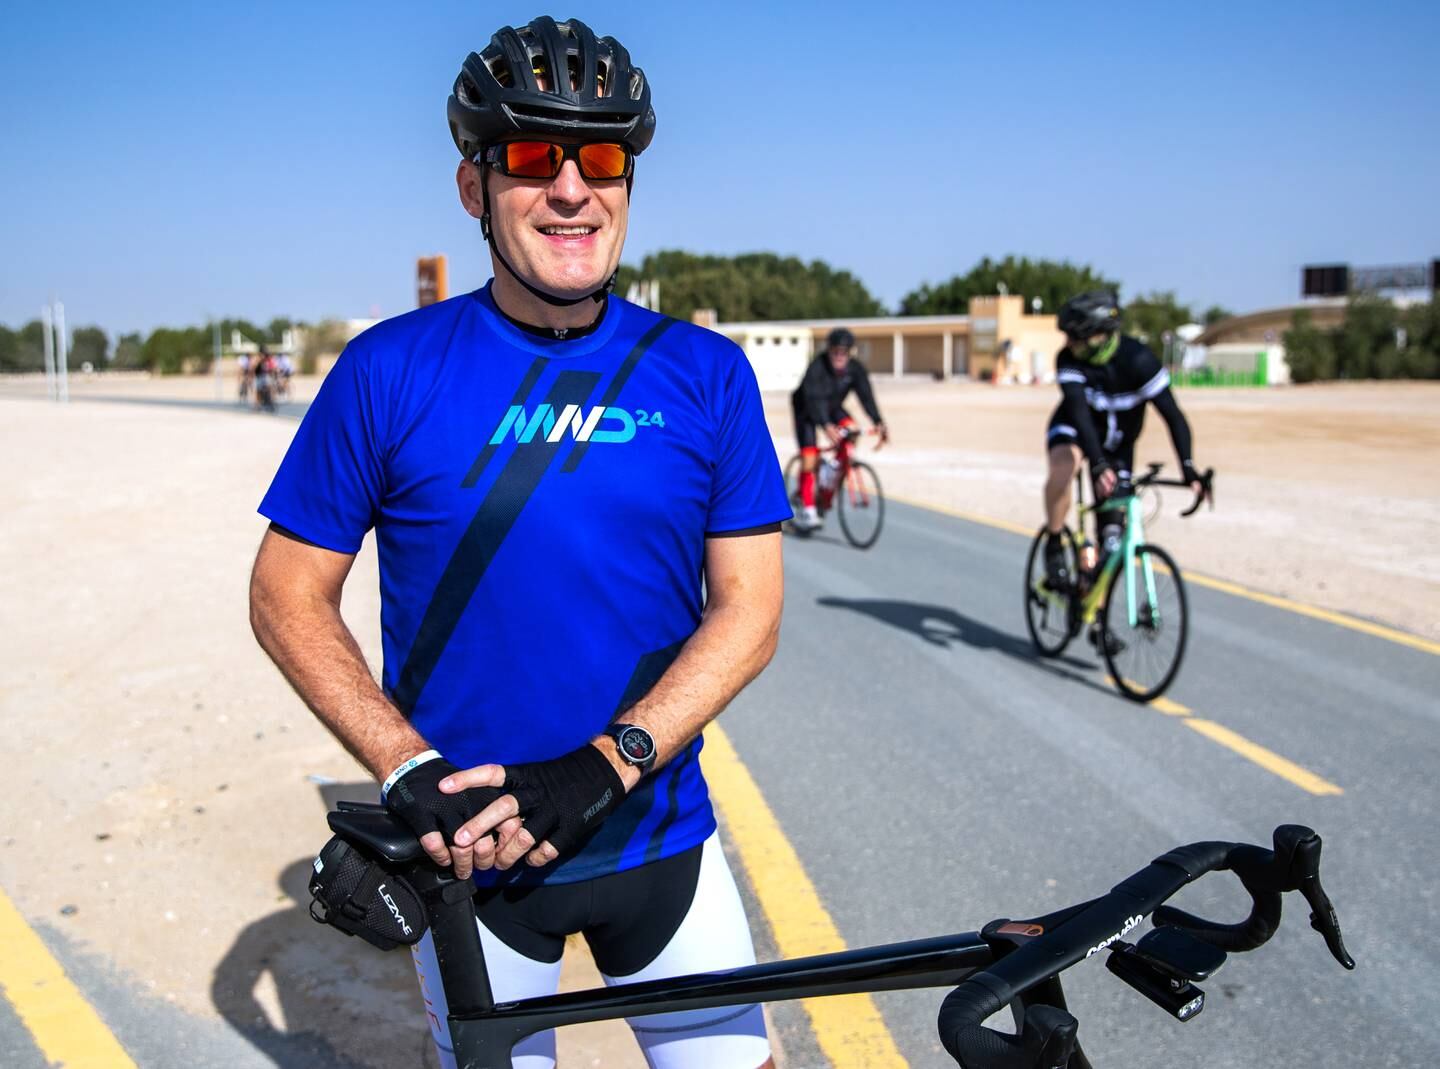 Sandy Stirling has been putting in the hours at Al Qudra Cycle Track in the lead-up to the challenge. Victor Besa / The National